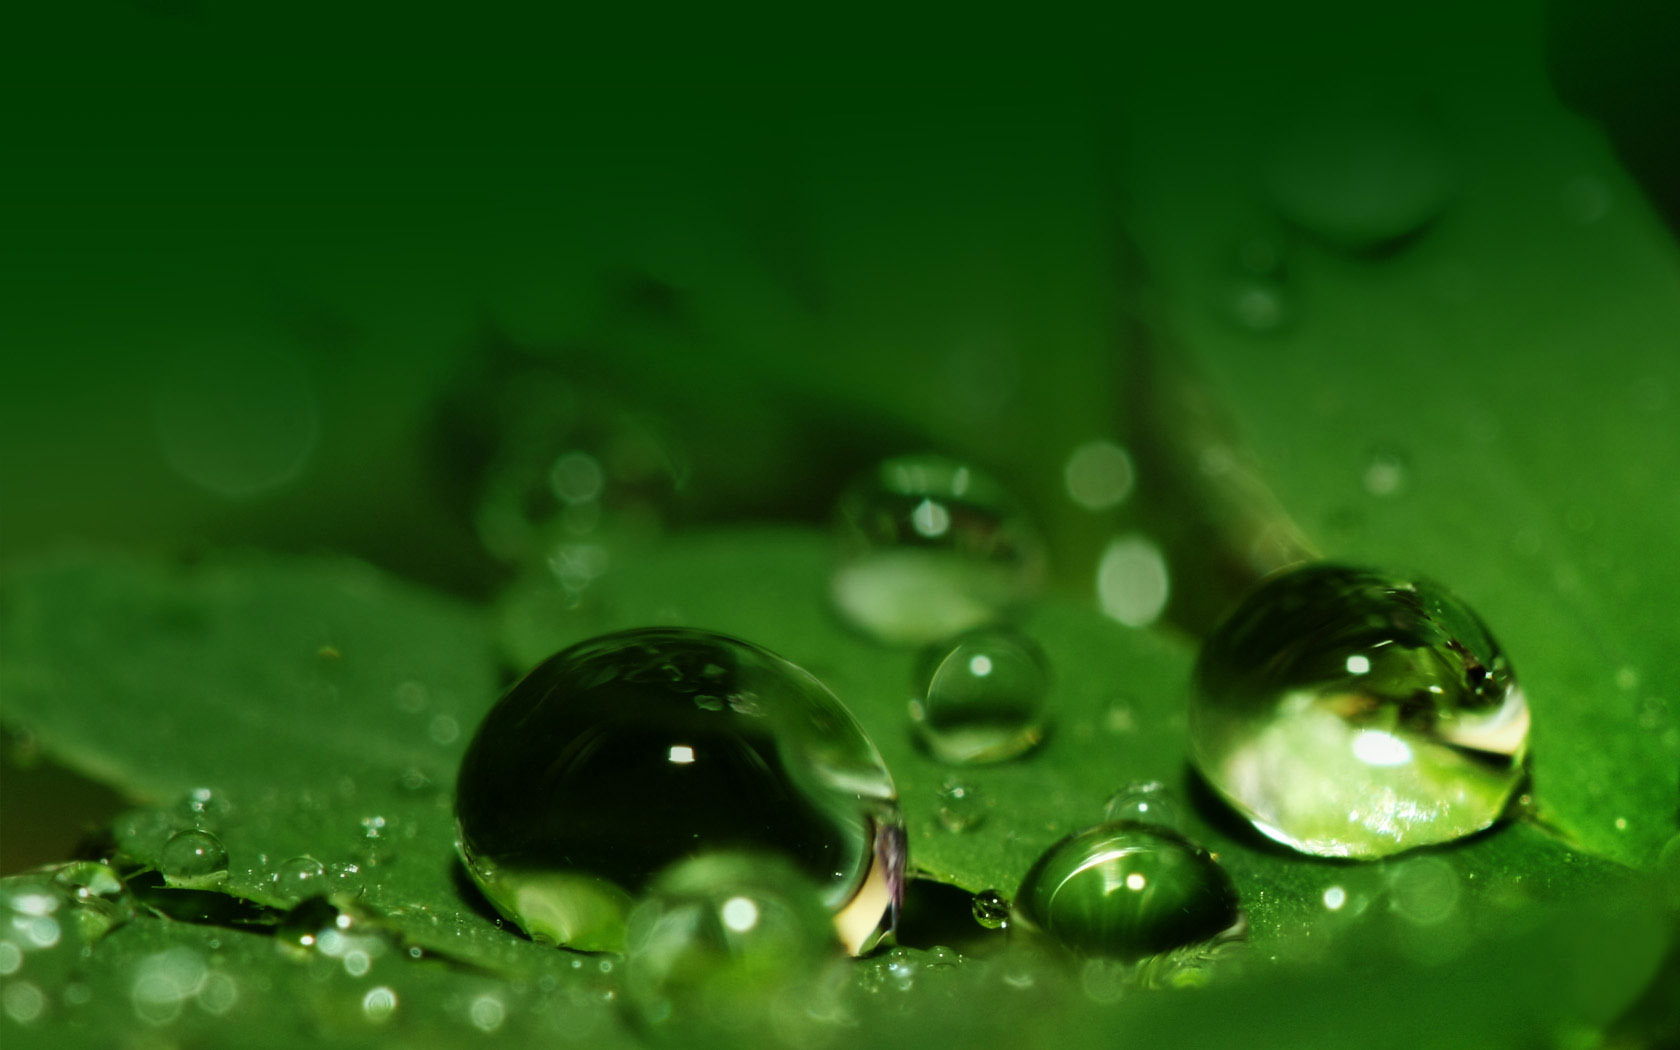 Green high-definition water drop picture wallpaper